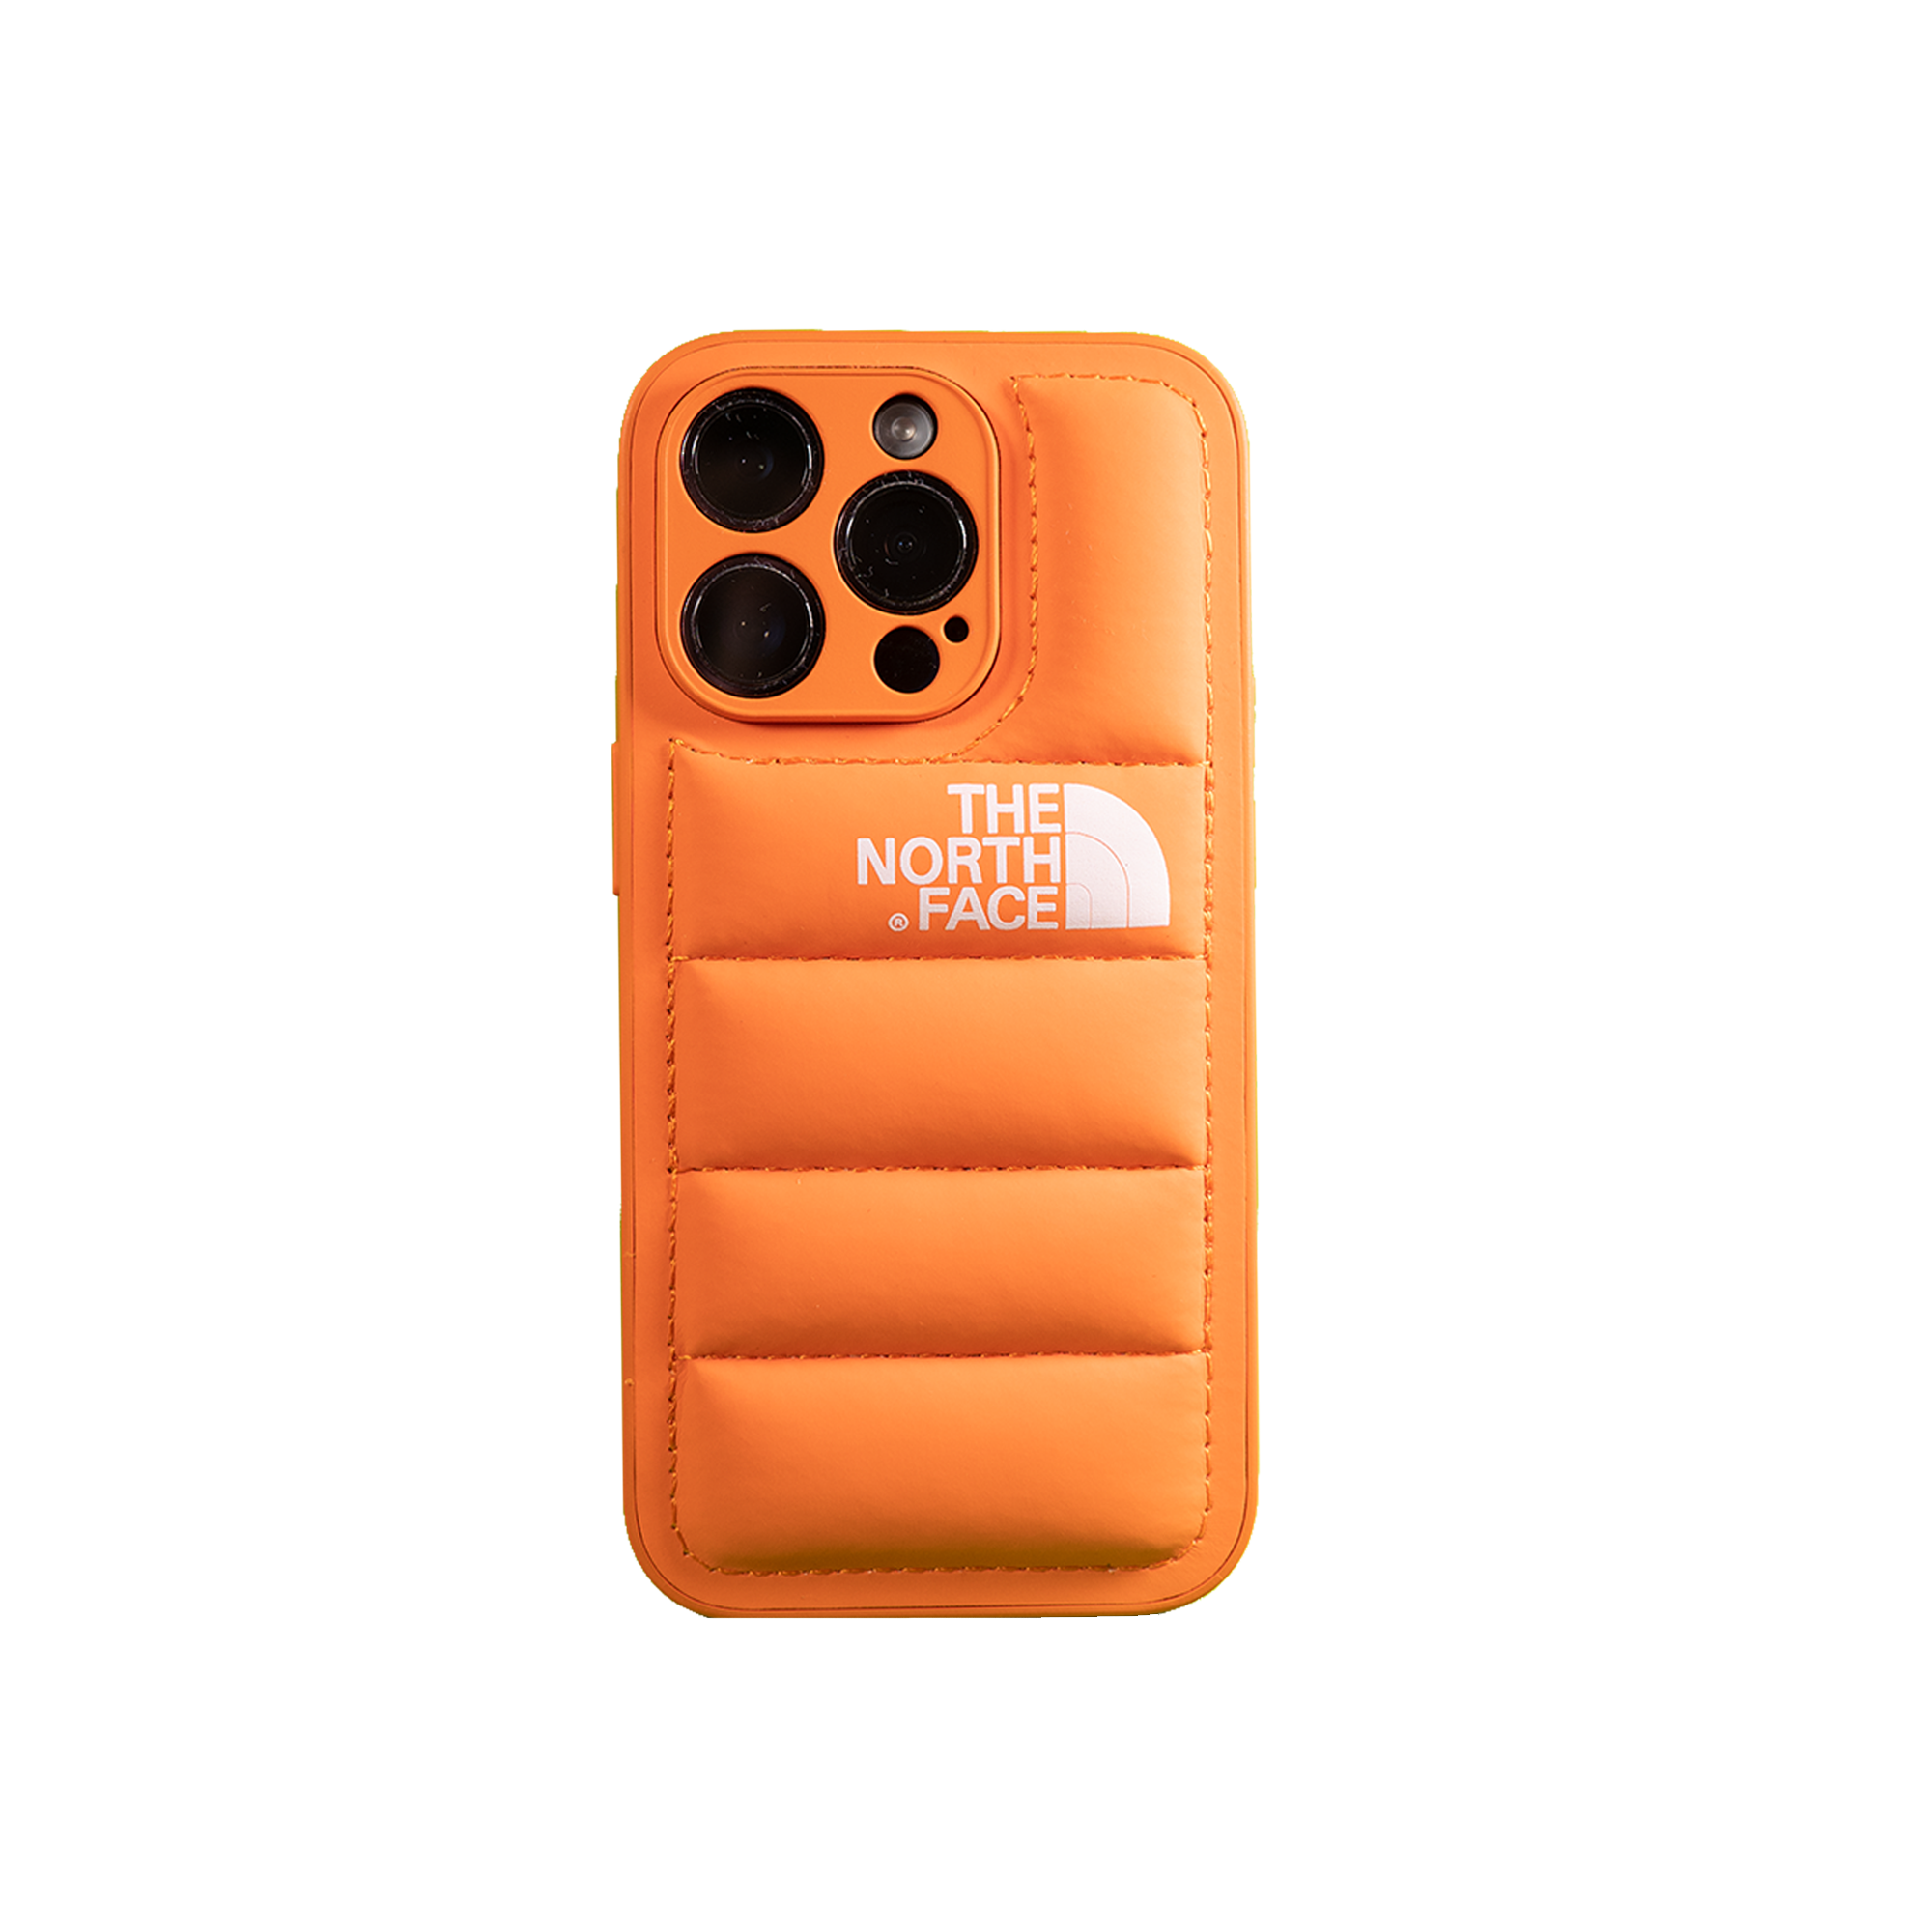 Vivid orange phone case from The North Face, providing standout protection and style.